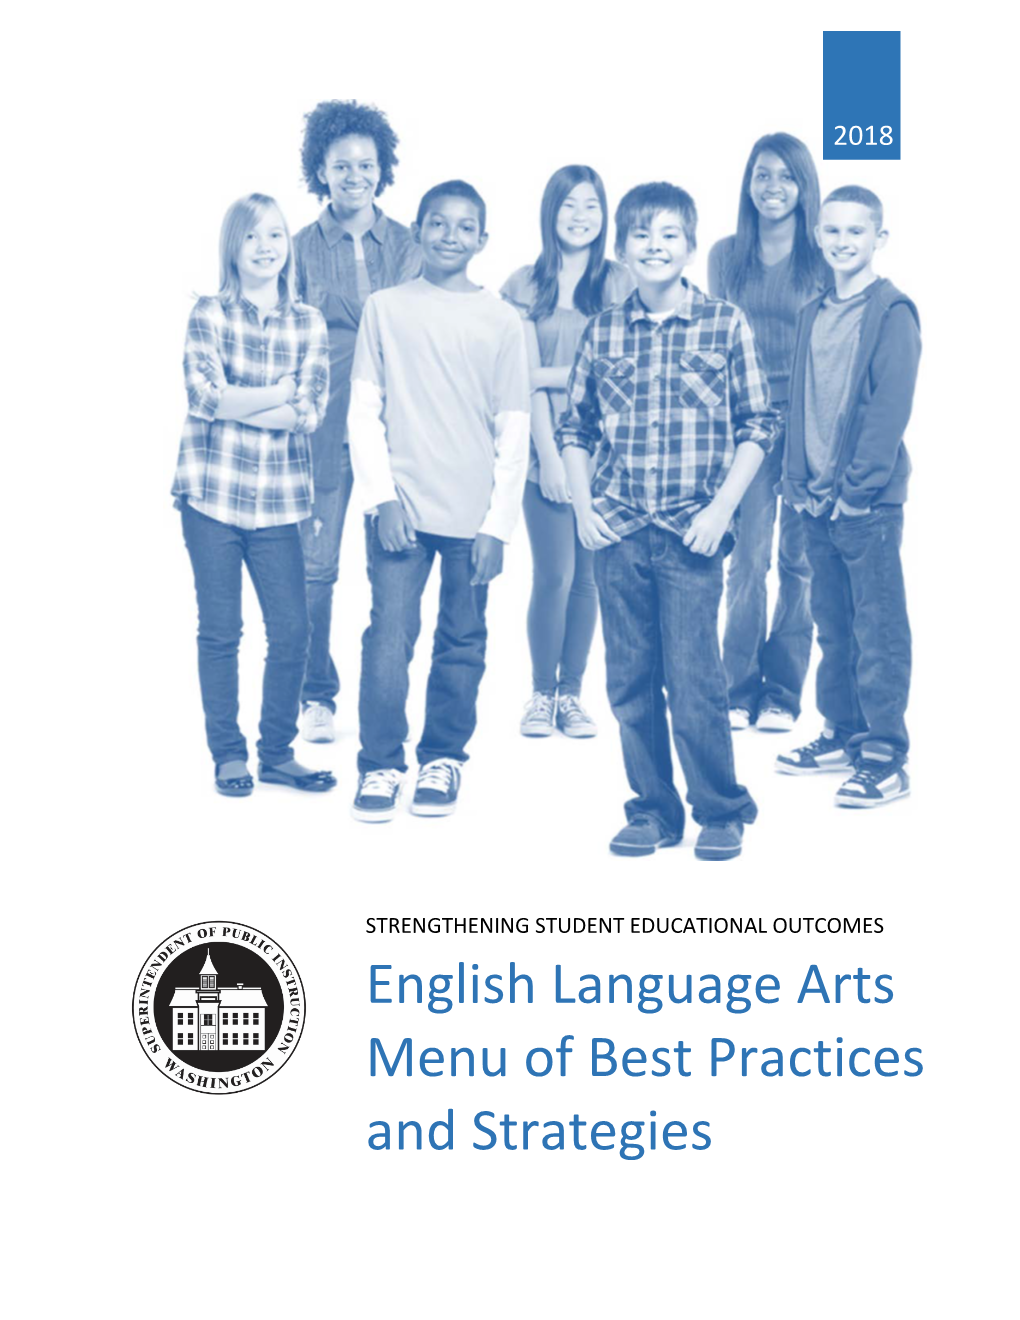 English Language Arts Menu of Best Practices and Strategies